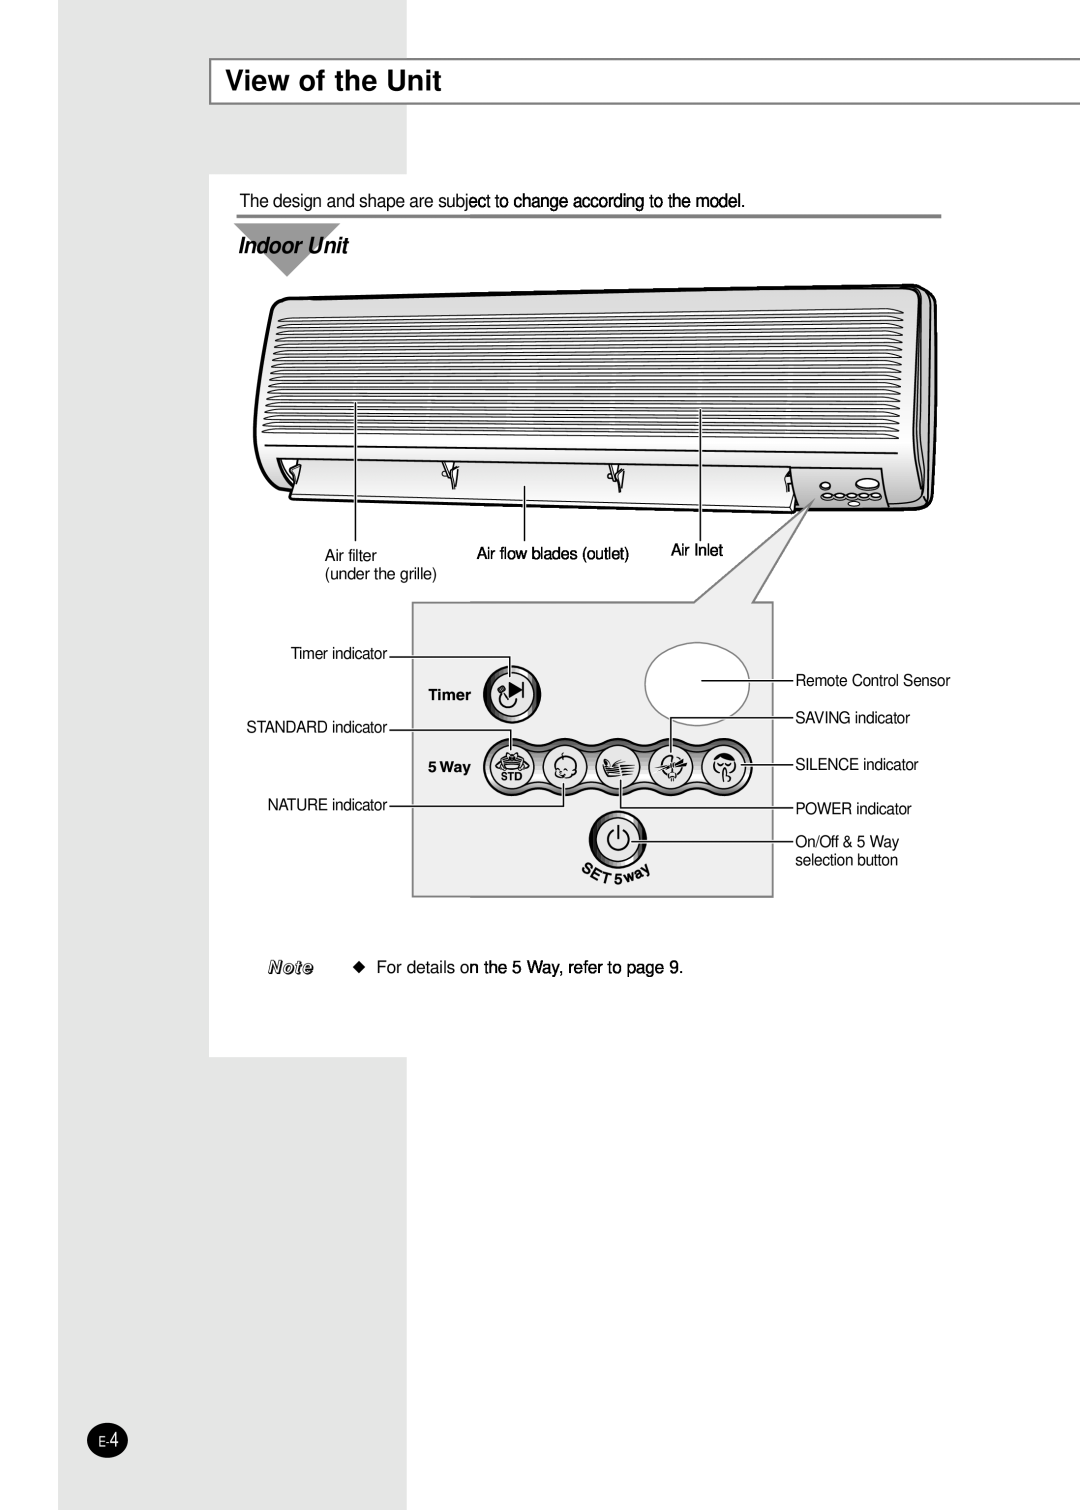 Samsung AM26B1(B2)E12, UM14B1(B2)E2 View of the Unit, Indoor Unit, Air flow blades outlet, On/Off & 5 Way selection button 